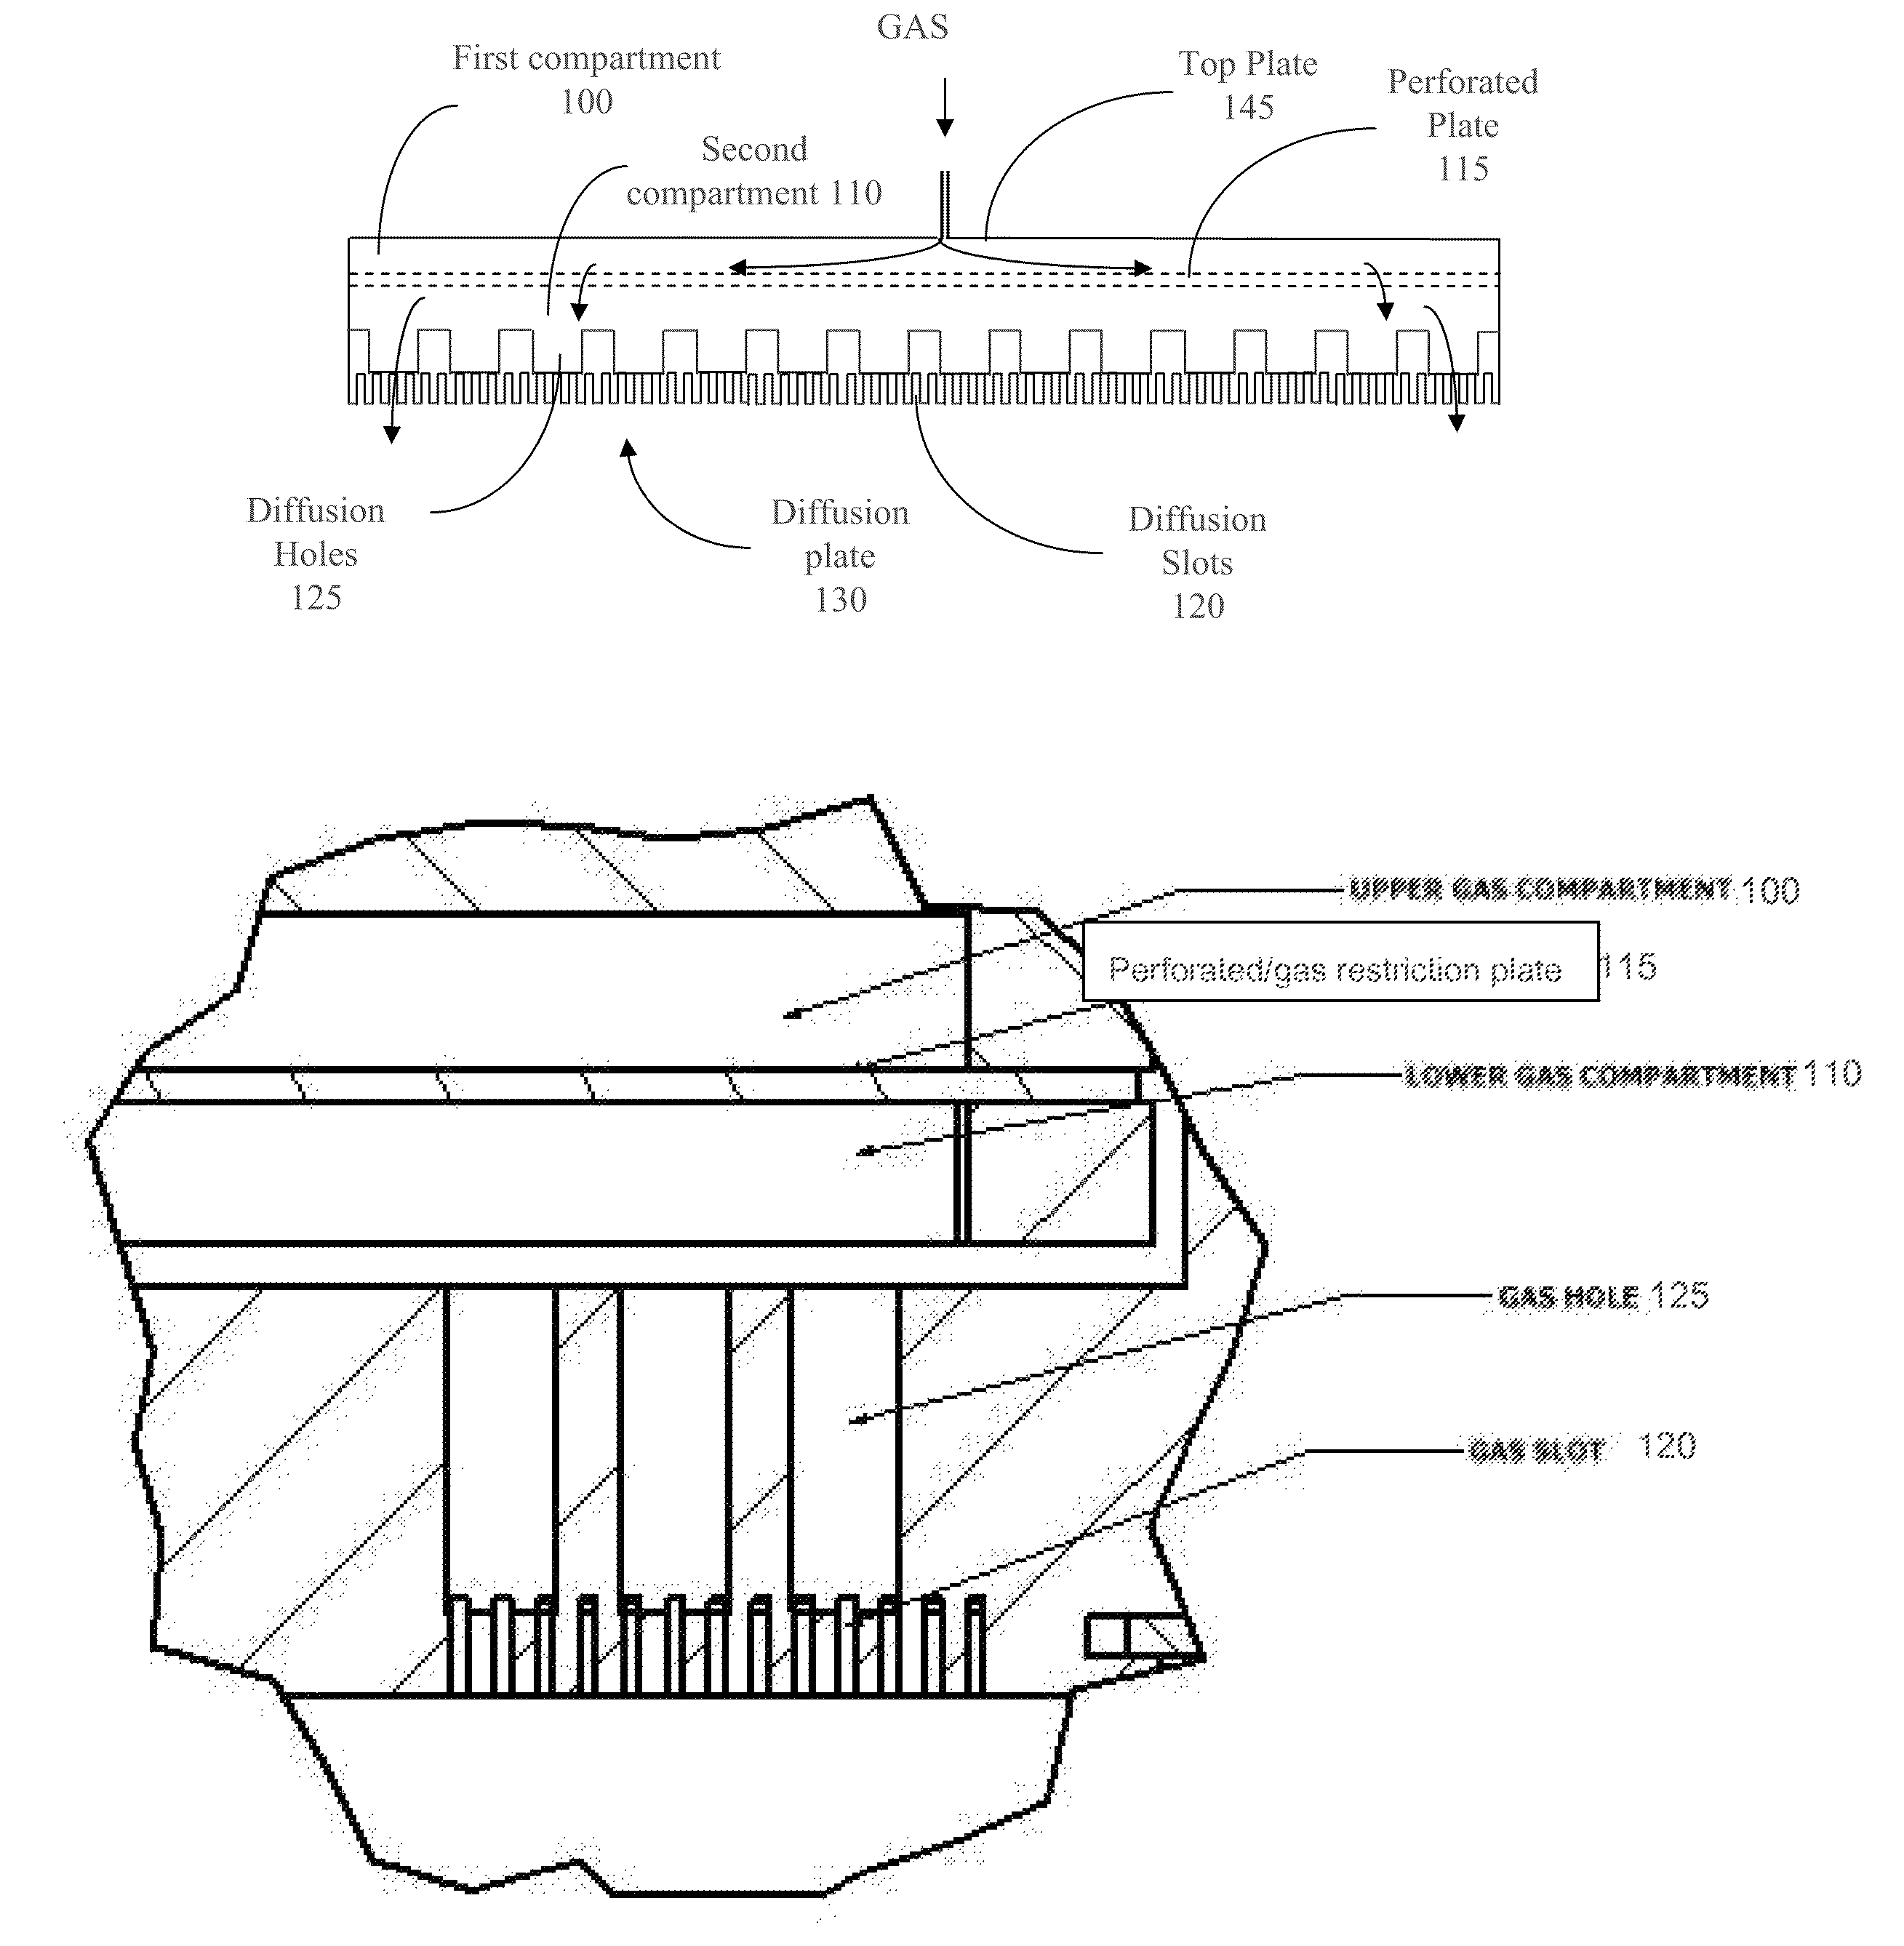 Showerhead assembly for plasma processing chamber